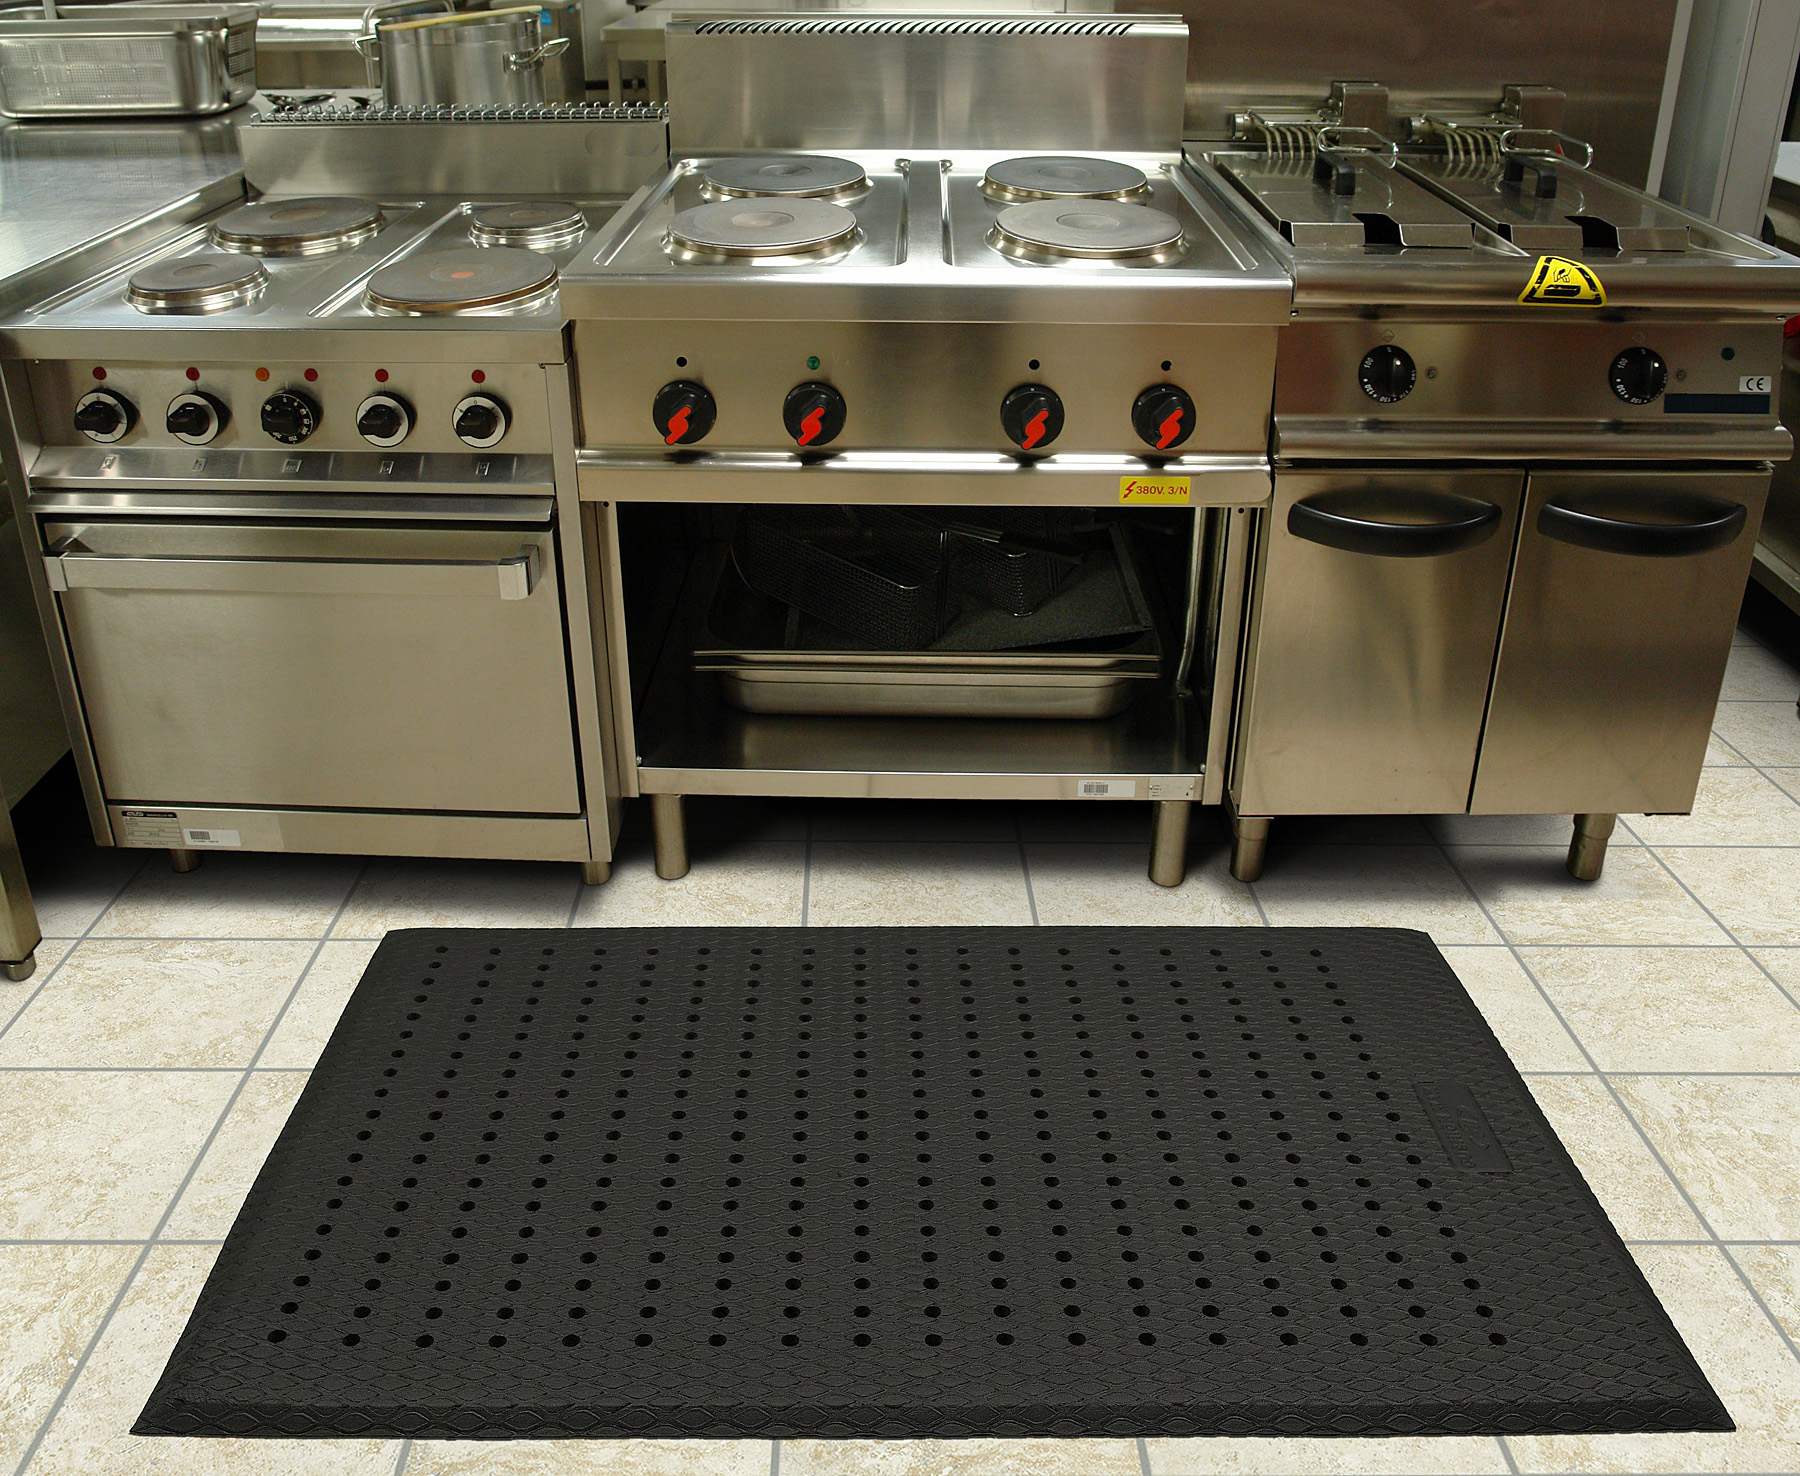 Cushion Max mats are designed for dry or wet environments, including a variety of industrial and commercial kitchen applications